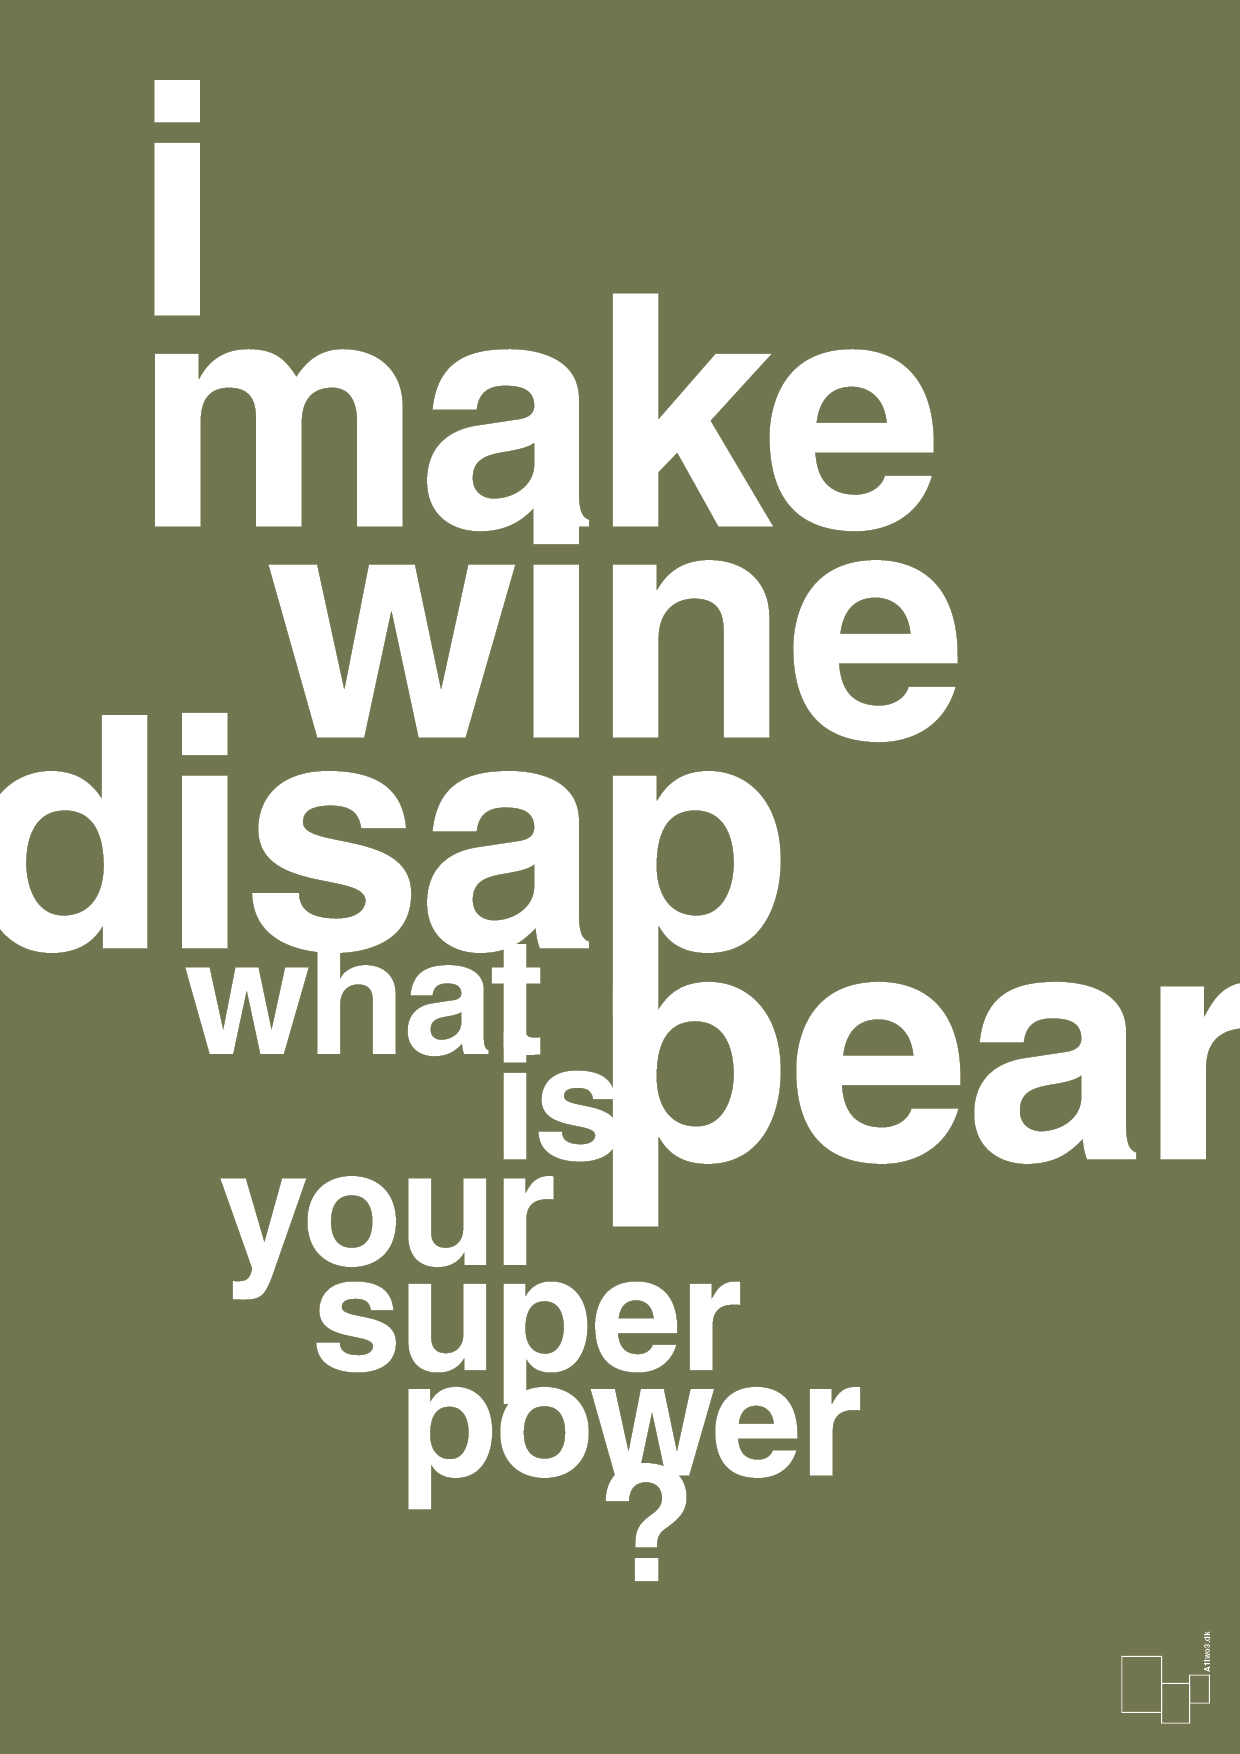 i make wine disappear what is your super power - Plakat med Mad & Drikke i Secret Meadow